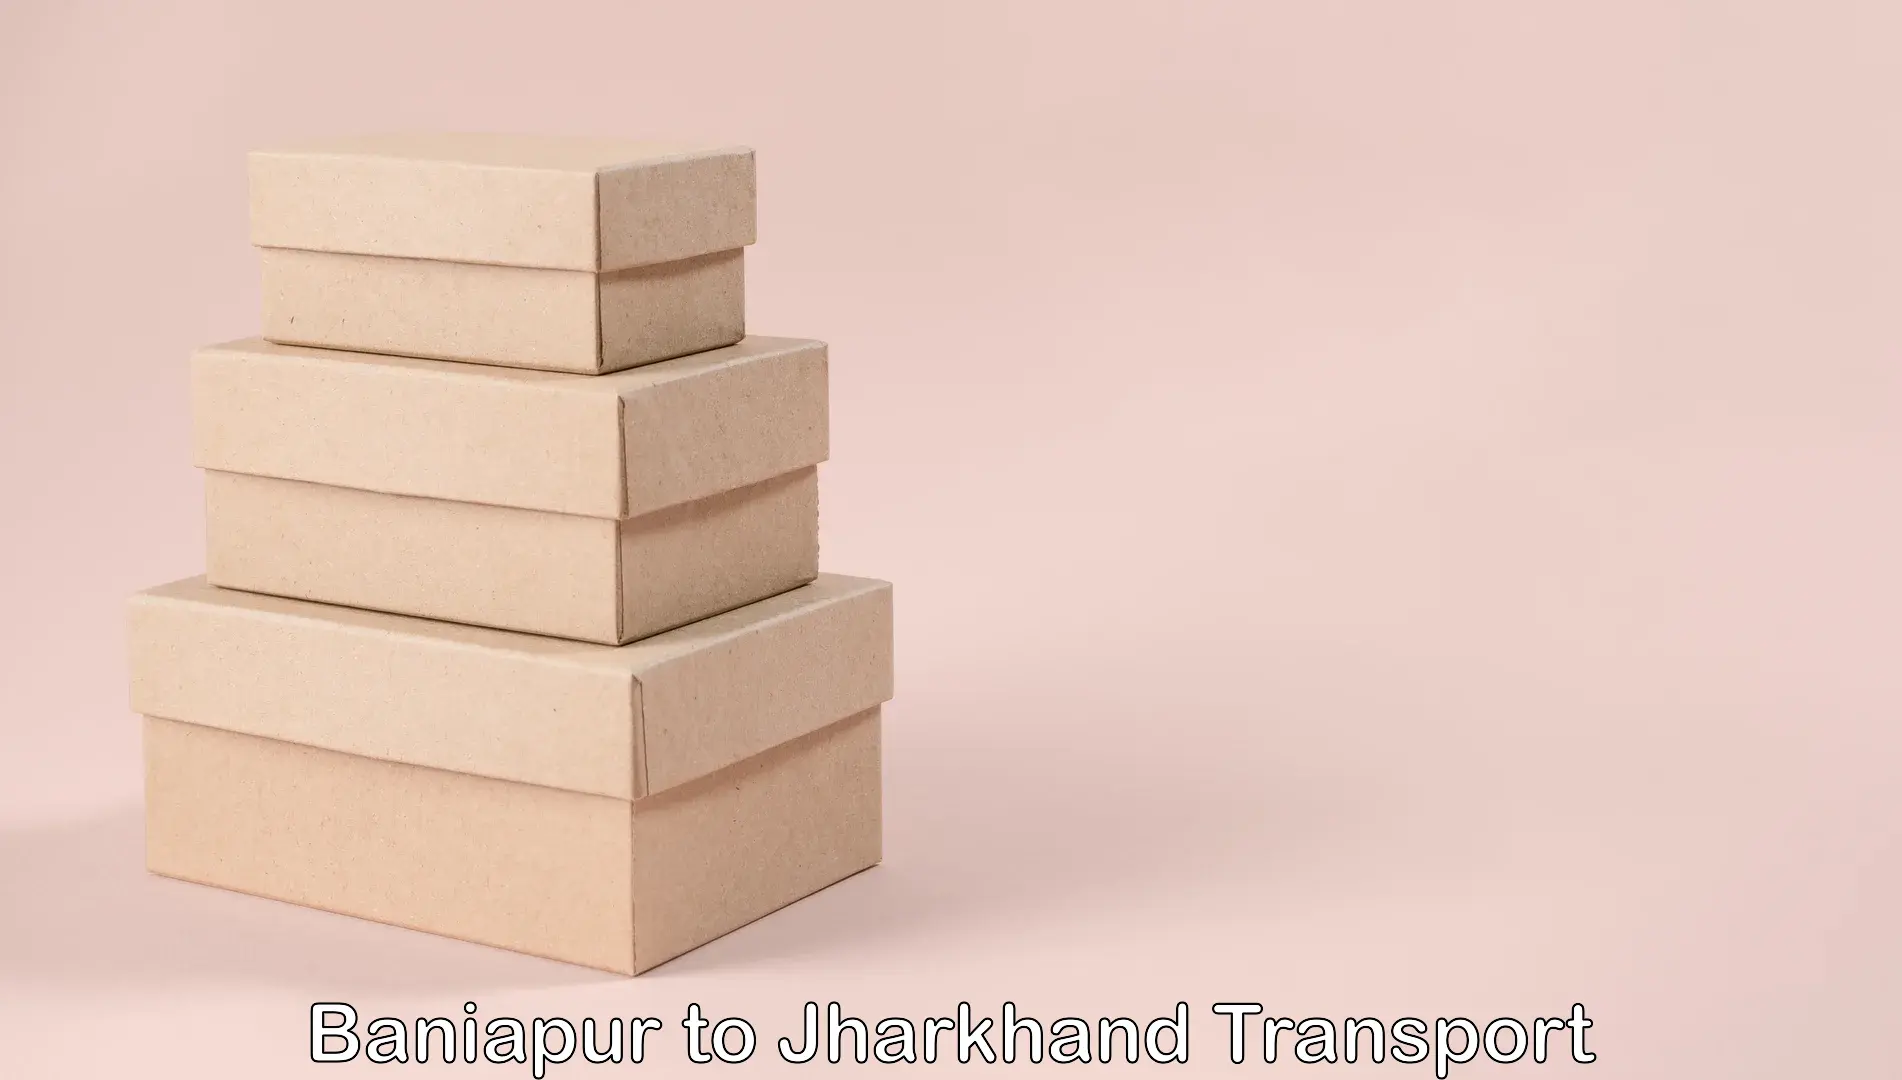 Express transport services Baniapur to Dhanbad